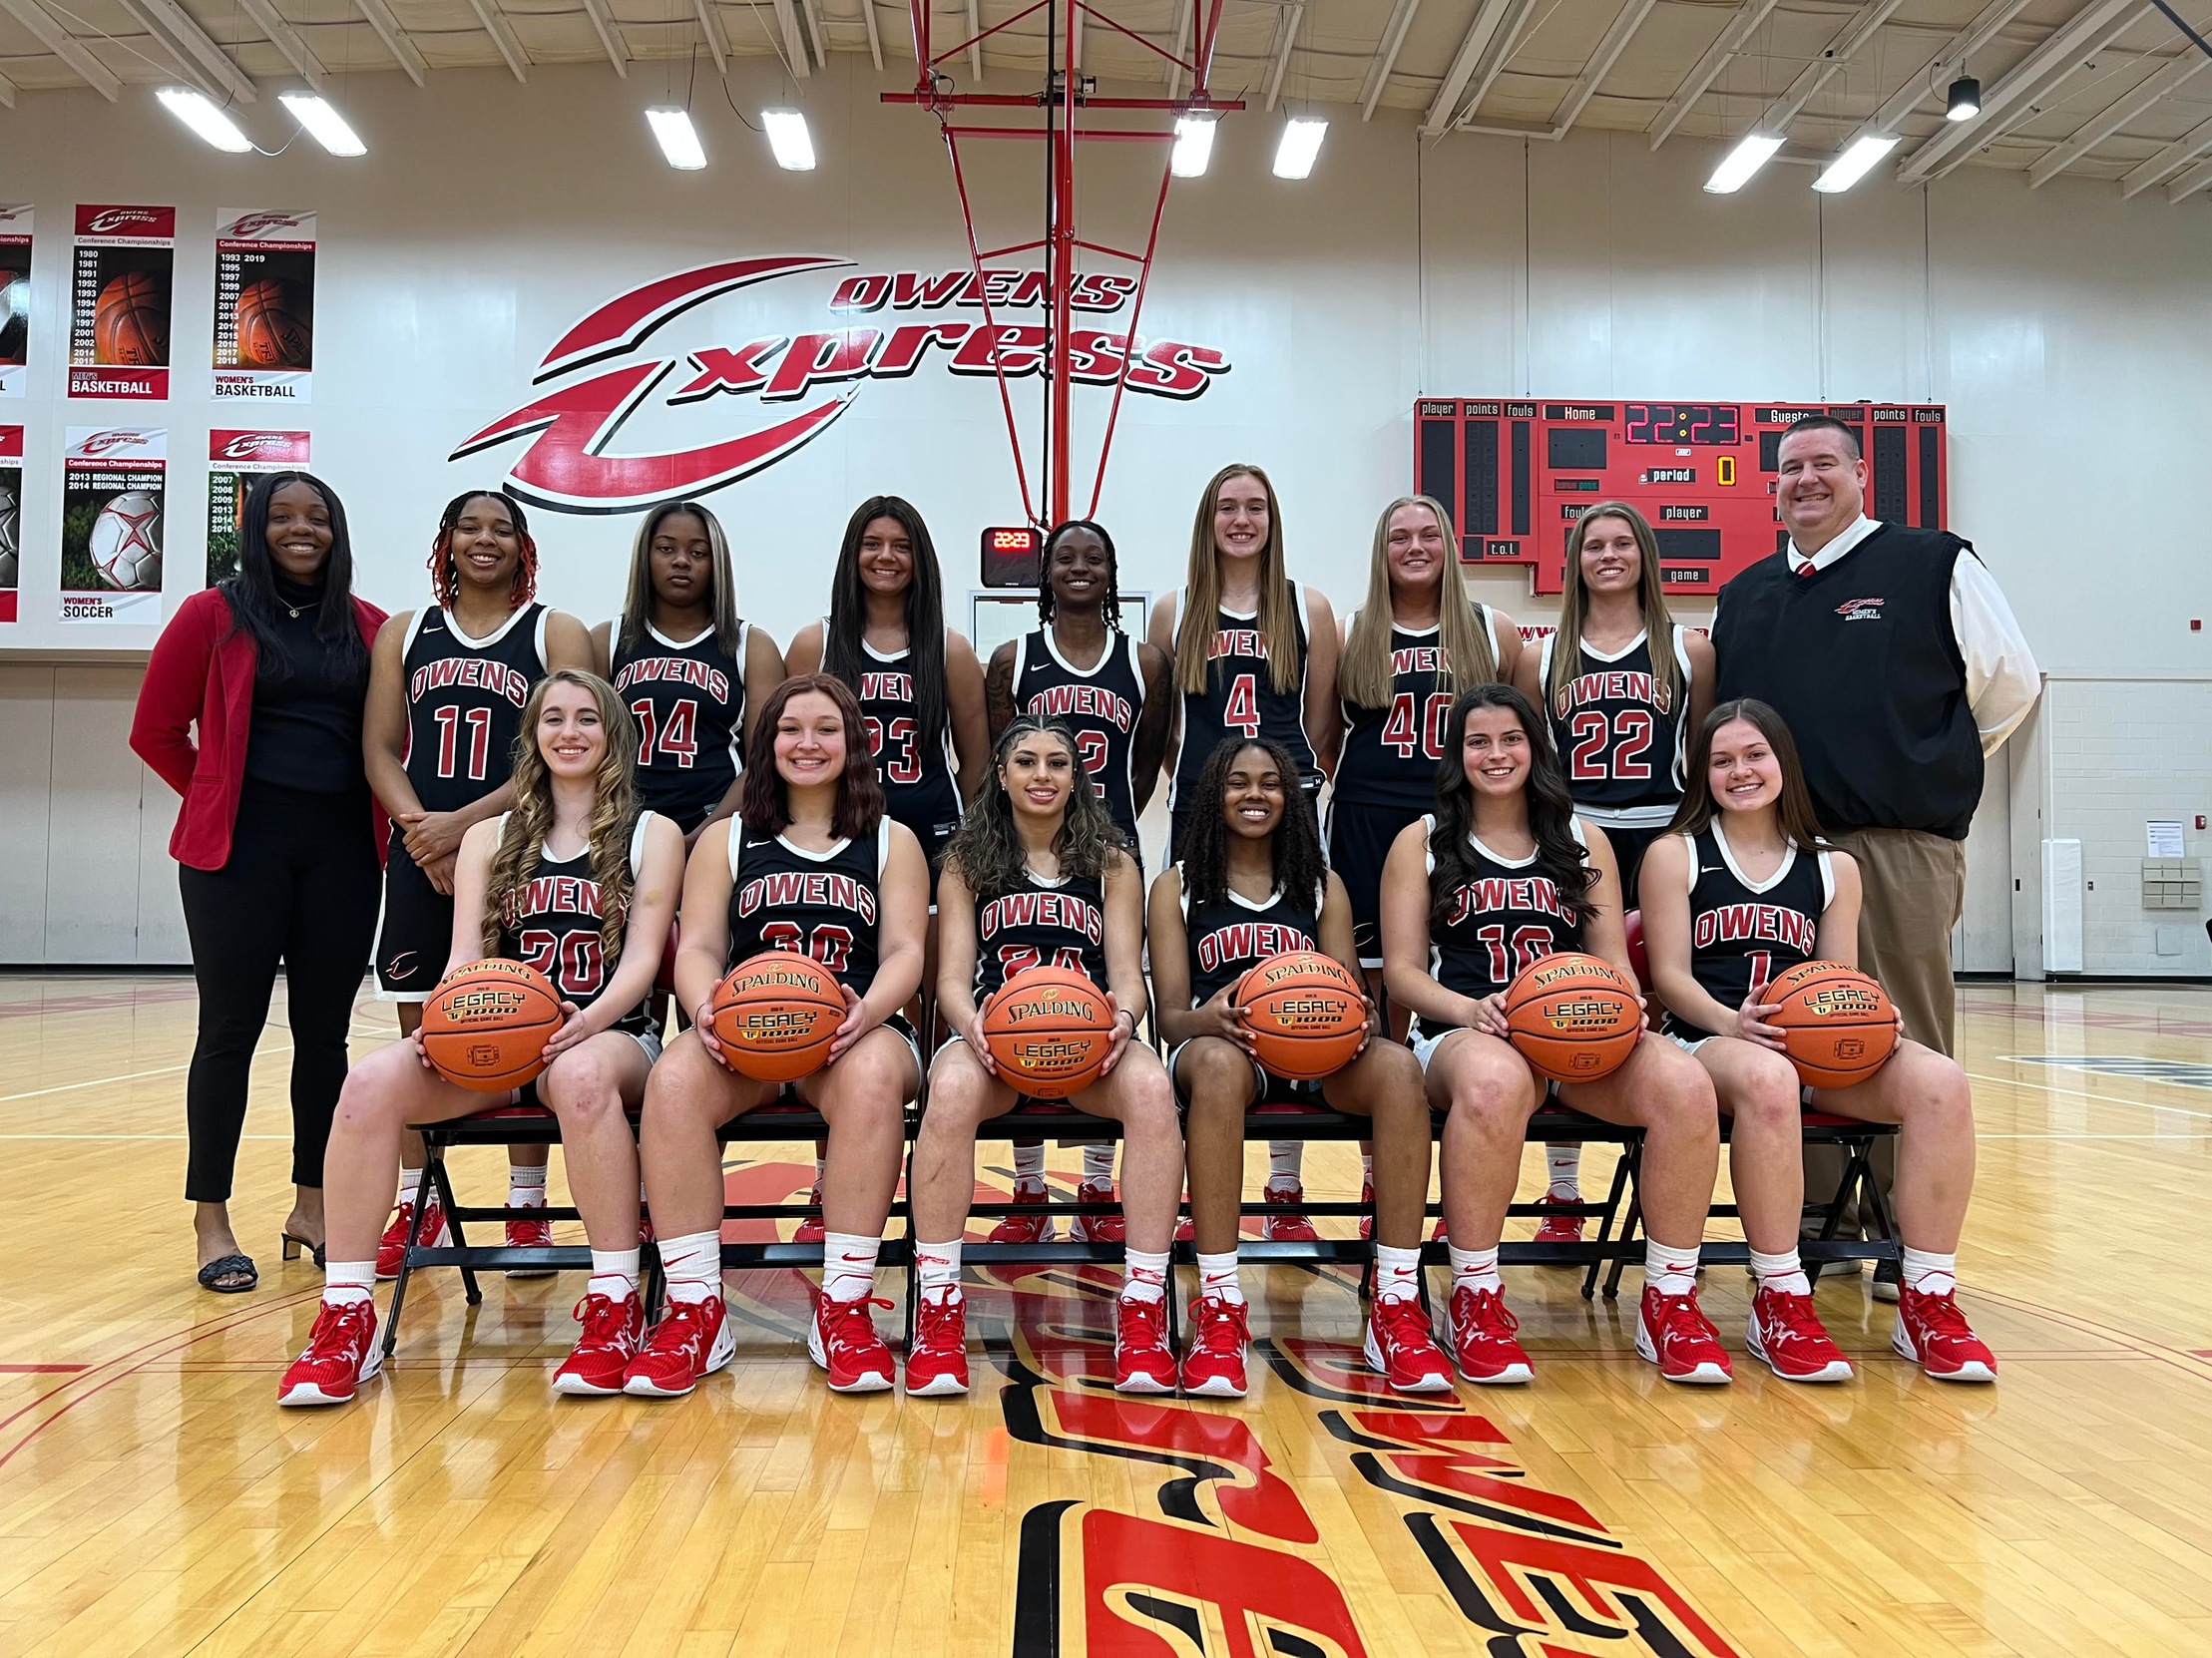 Express Women's Basketball - Defending Champions back for another year!